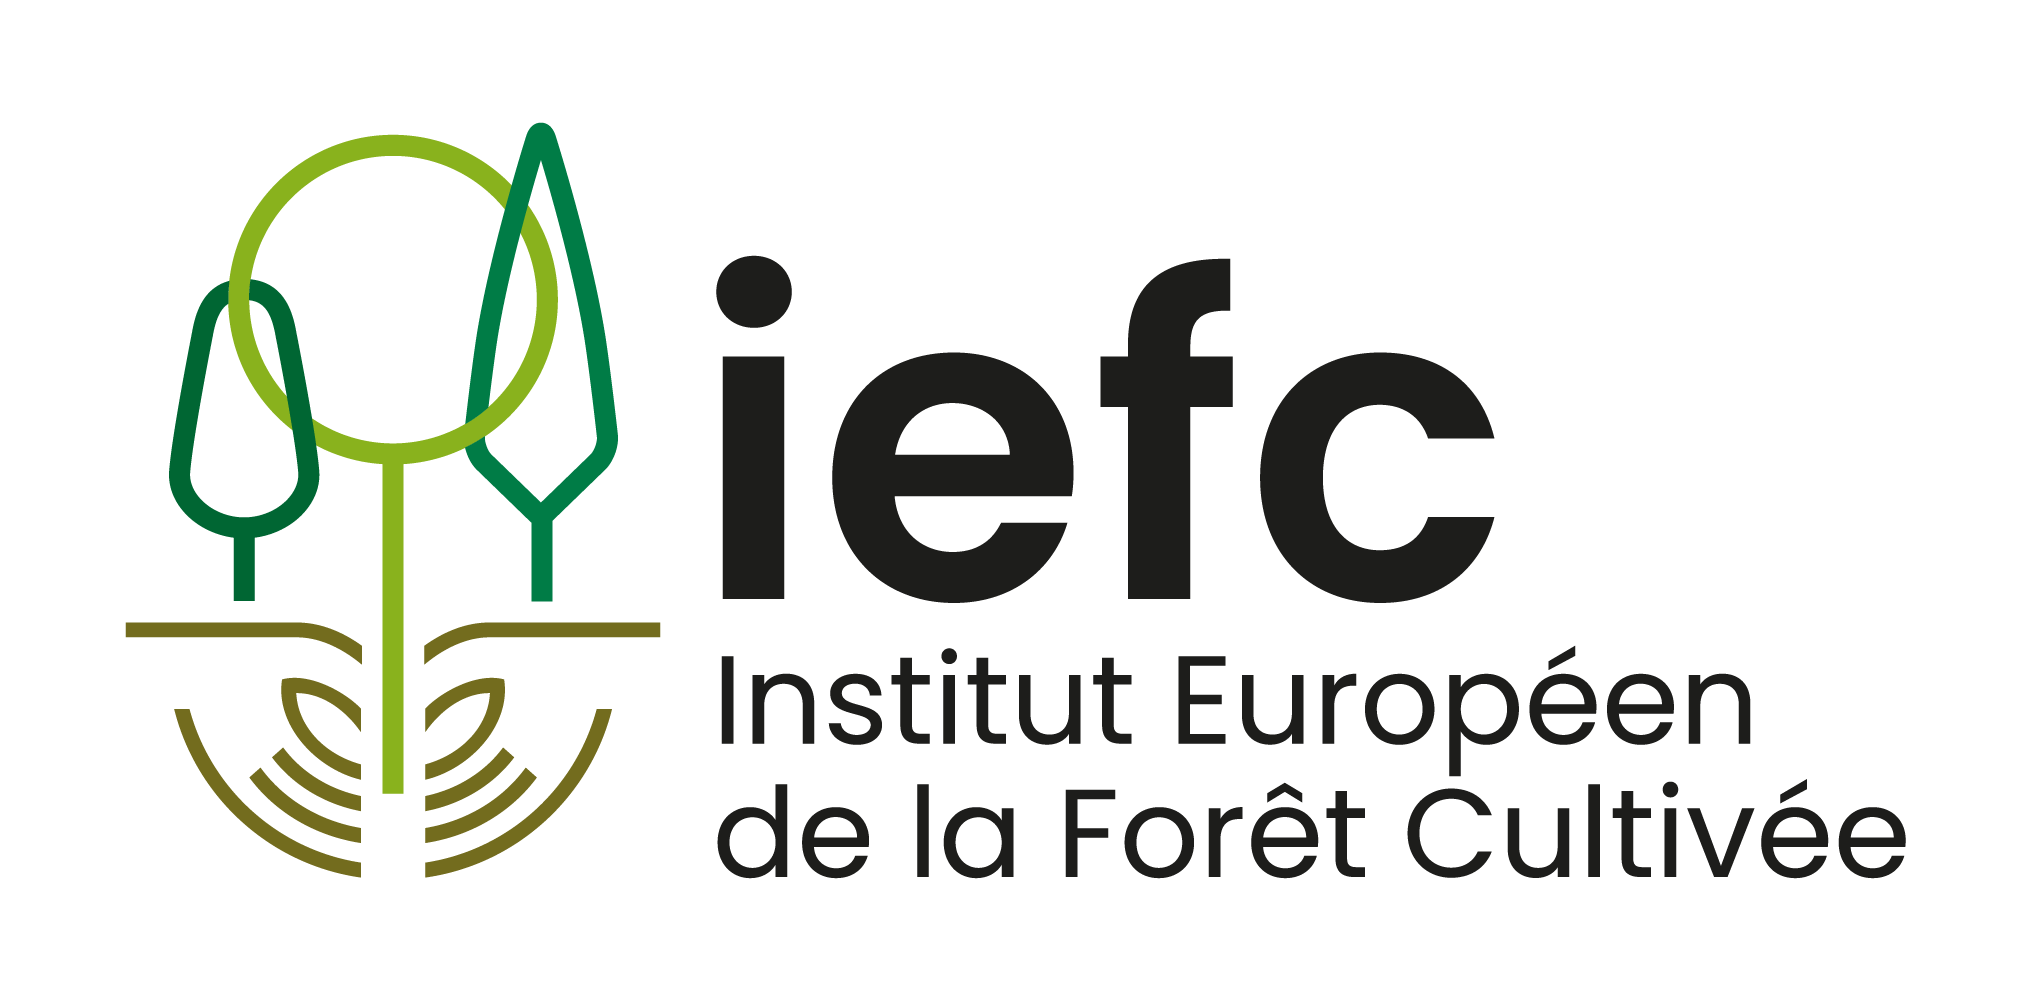 European Institute of Planted Forest